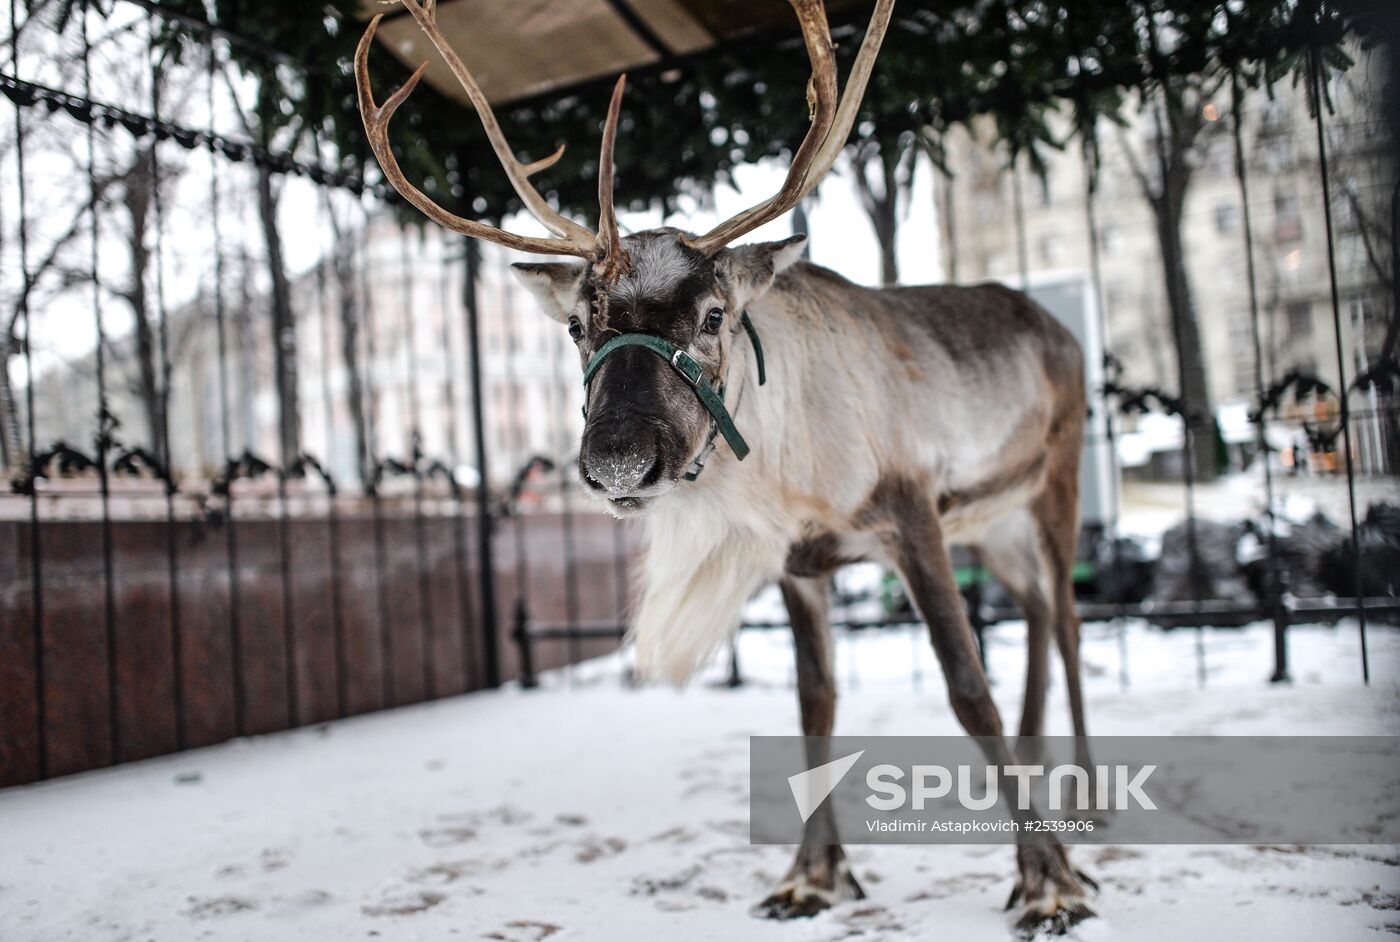 A reindeer arrives at Snow Queen festival site in downtown Moscow